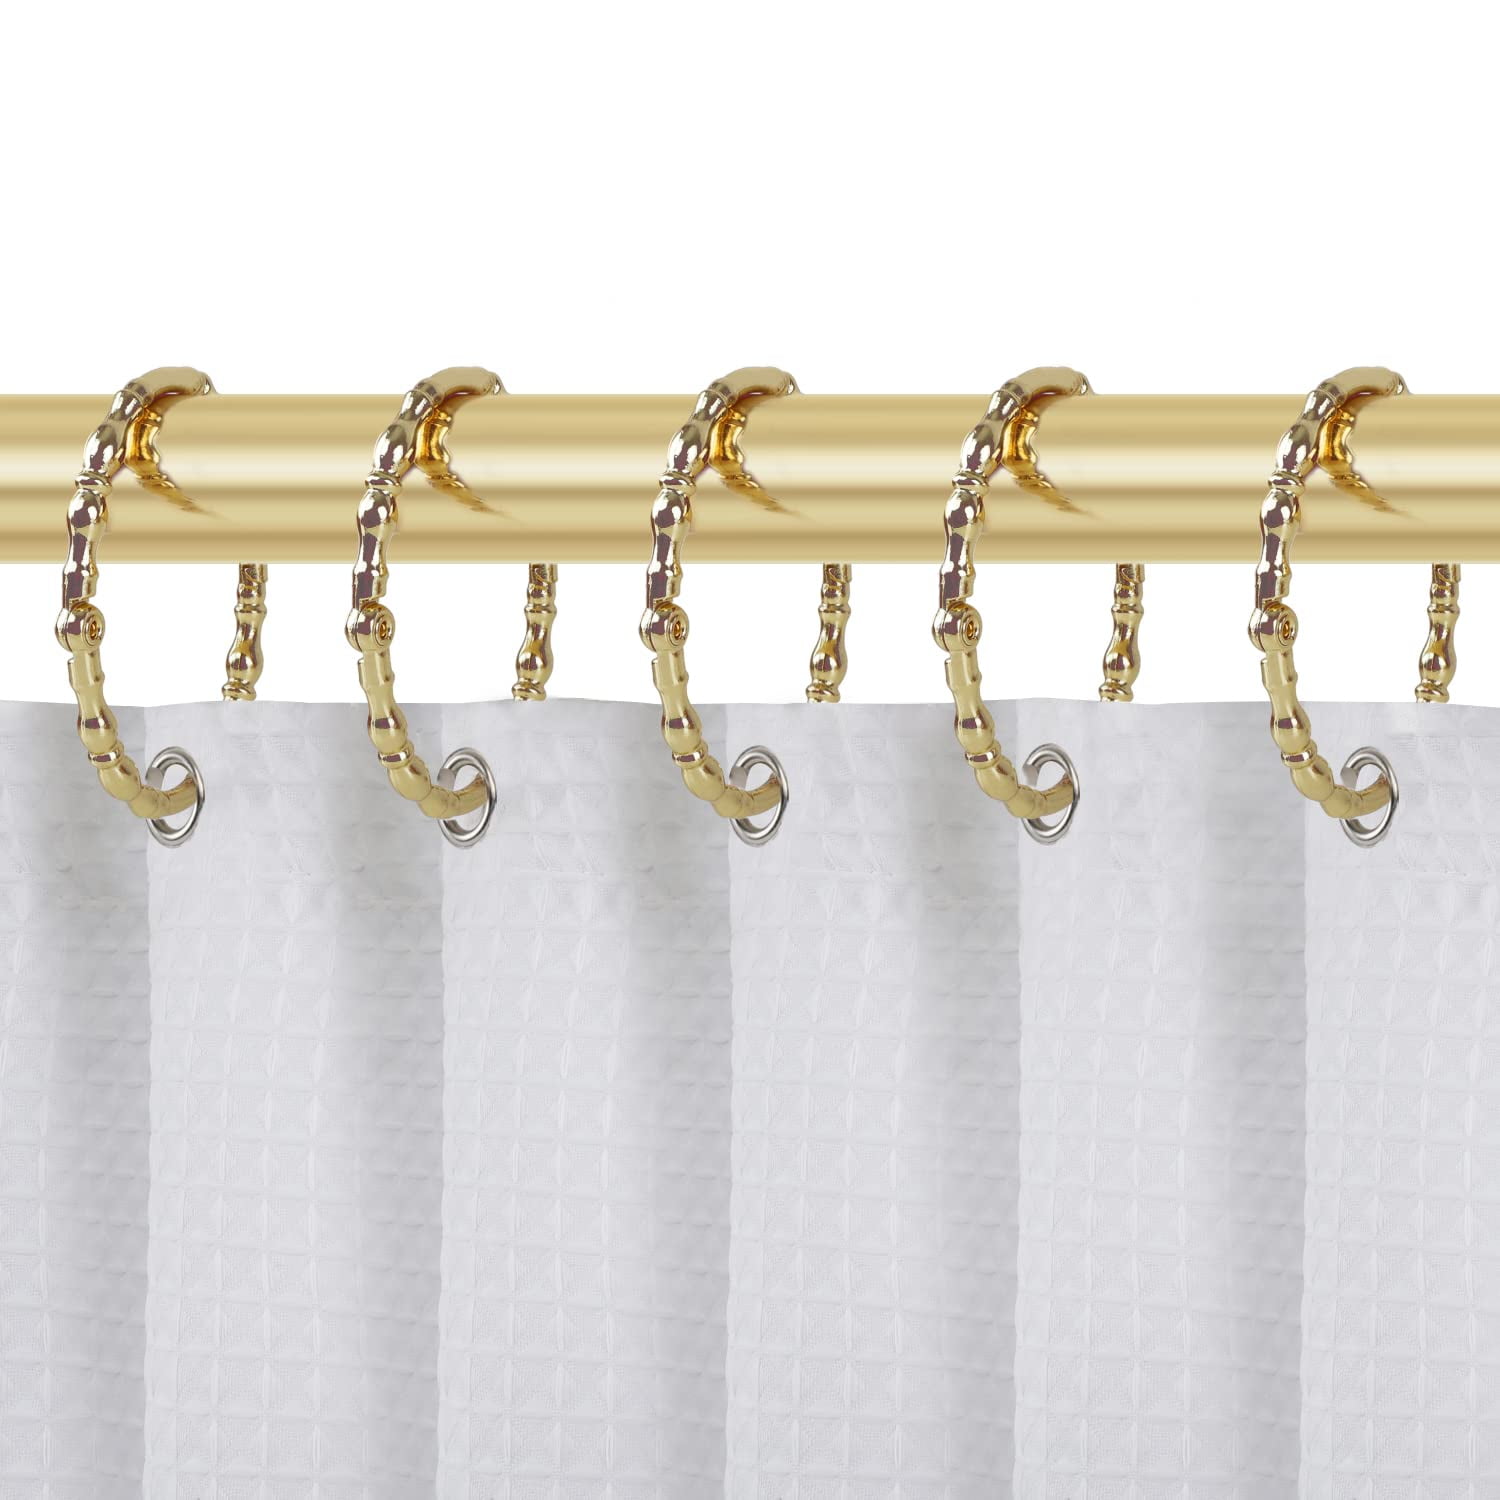 Utopia Alley Shower Hooks - Shower Curtain Rings for Bathroom - Rust Proof Shower  Curtain Hooks for Shower Curtain or Liner - Set of 12, Gold 